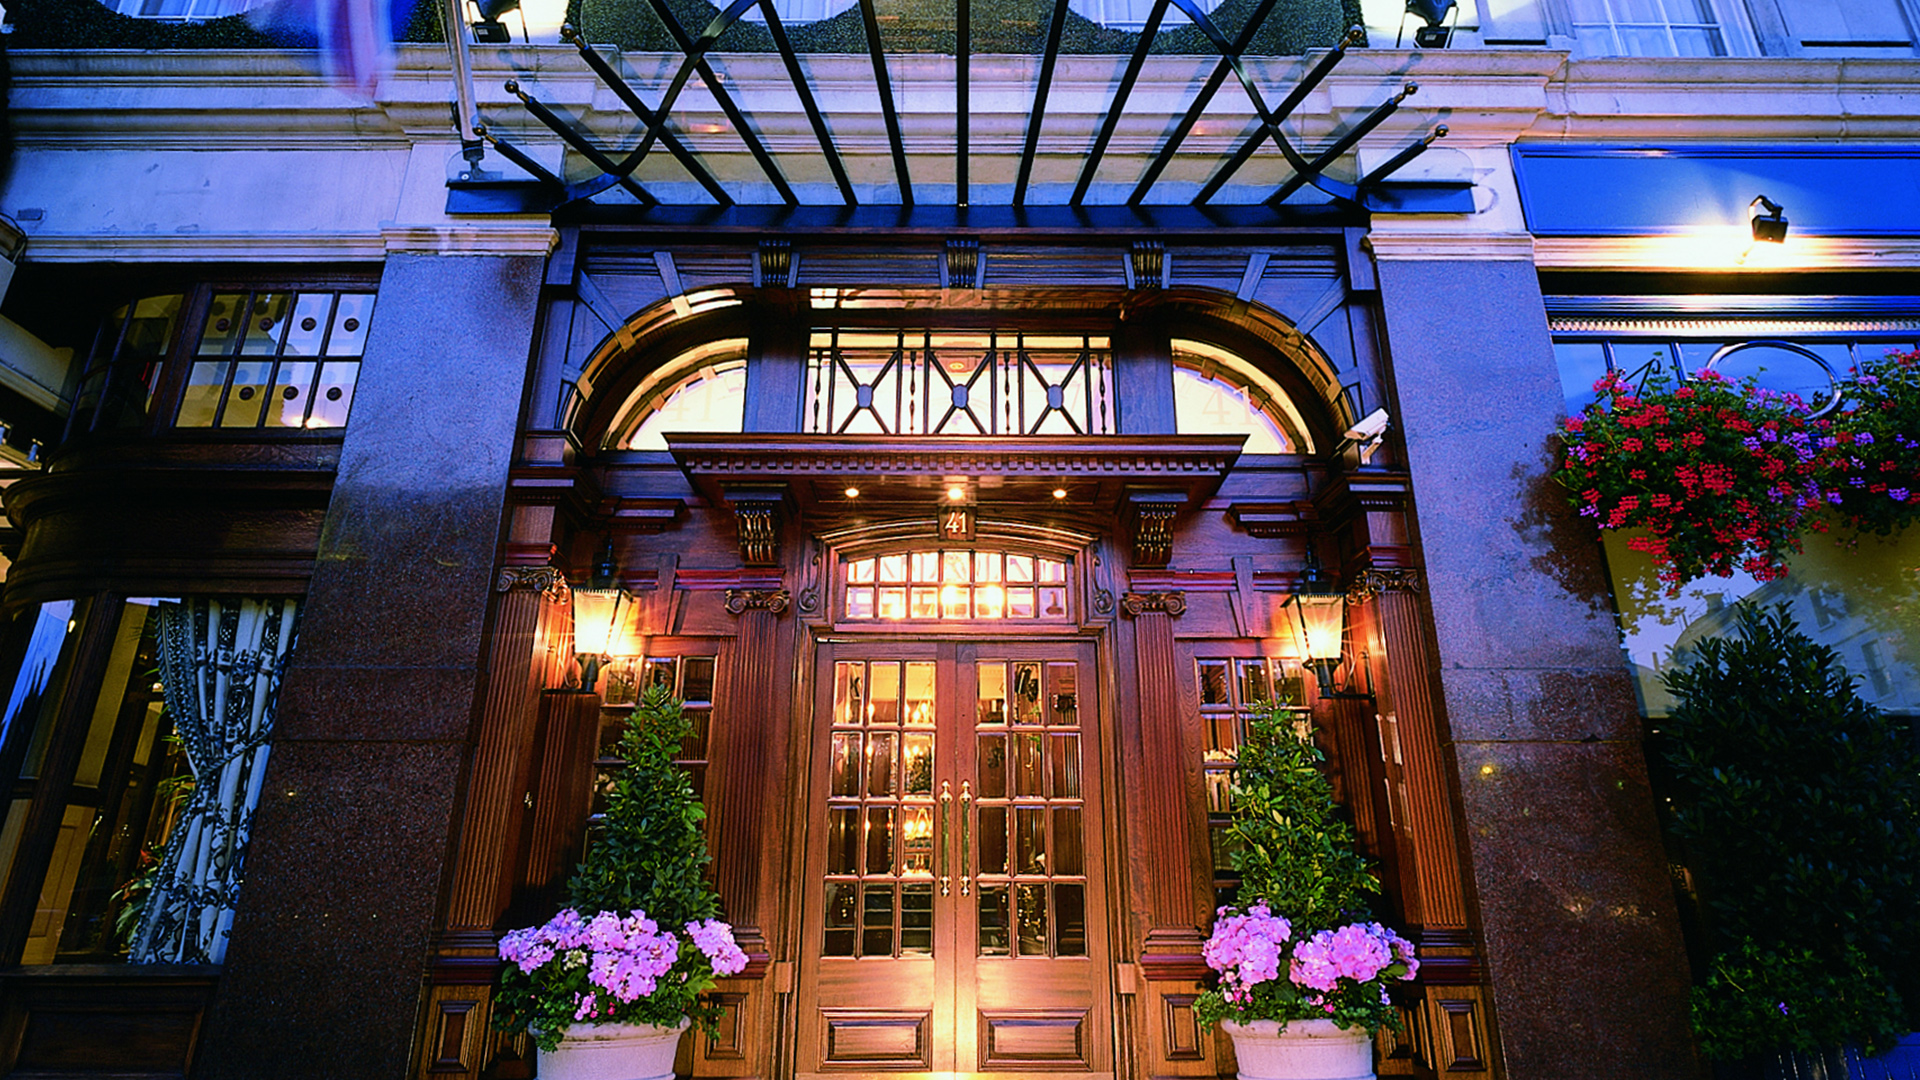 Hotel 41 entrance at twilight with||London's best boutique hotels - The Atheneuum hotel lobby interior with vibrant decor and contemporary design|||London's best boutique hotels - The Montague on the Gardens front entrance with a doorman out the front|London's best boutique hotels - Henrietta Hotel London Eye View Room||